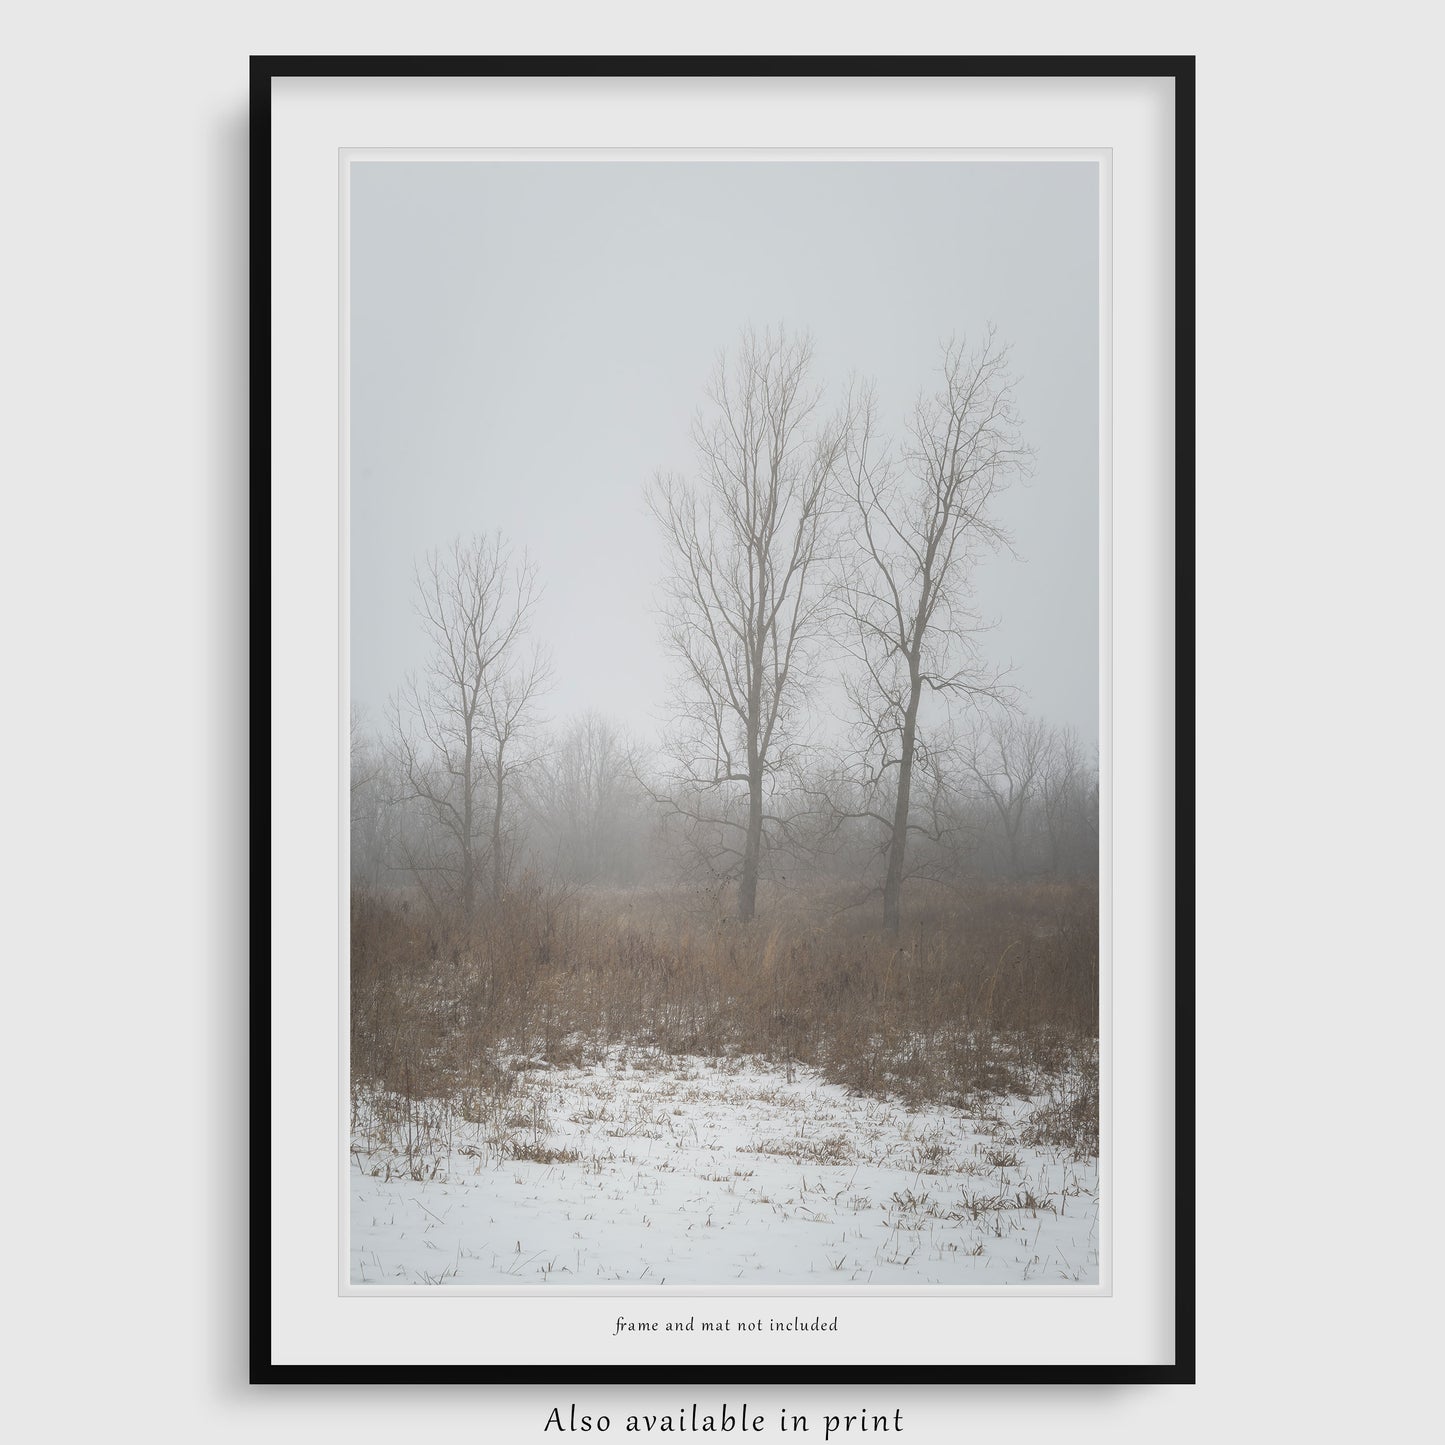 The photograph is beautifully presented as a framed print, showing this winter trees photograph is also available as a paper print. Please note that the frame and mat shown are for display purposes only and are not included in the purchase.